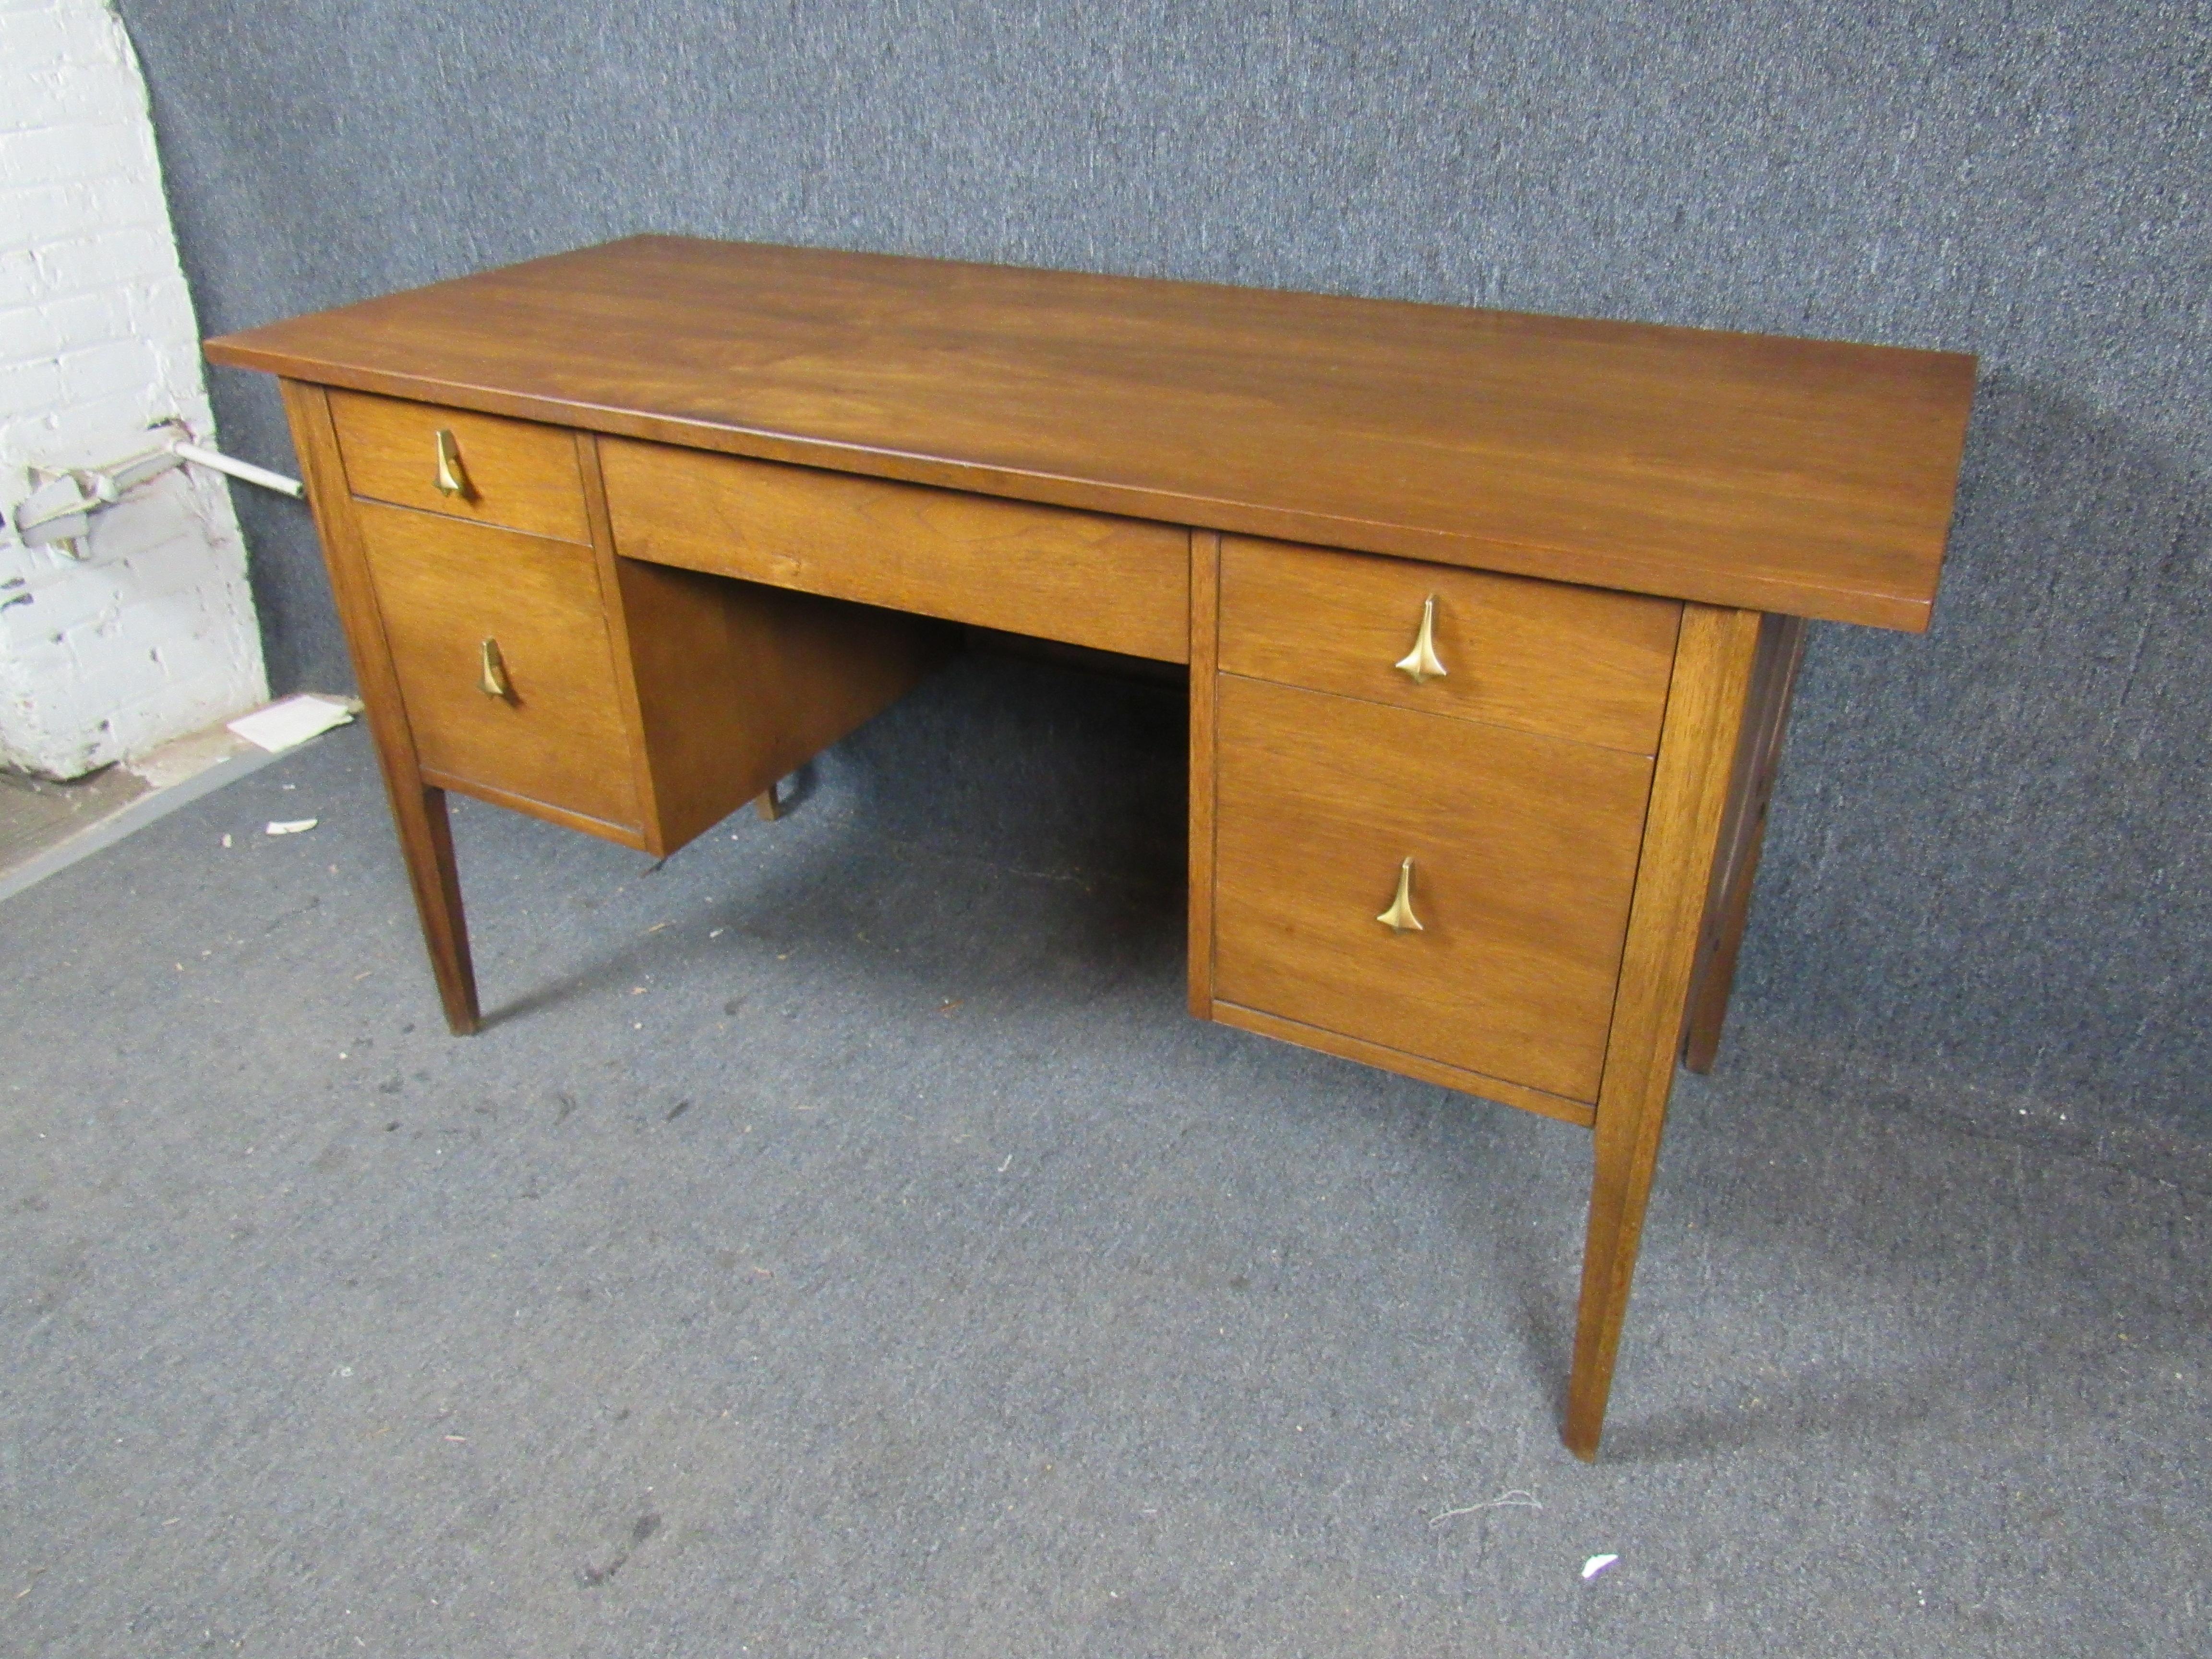 Here is a stunning and rare executive desk from Broyhill Furniture's seminal Brasilia line. Fine walnut shows off a stunning, rich wood grain while attractive brass hardware and a beautiful finished back with a cane inlay add to the vintage appeal.